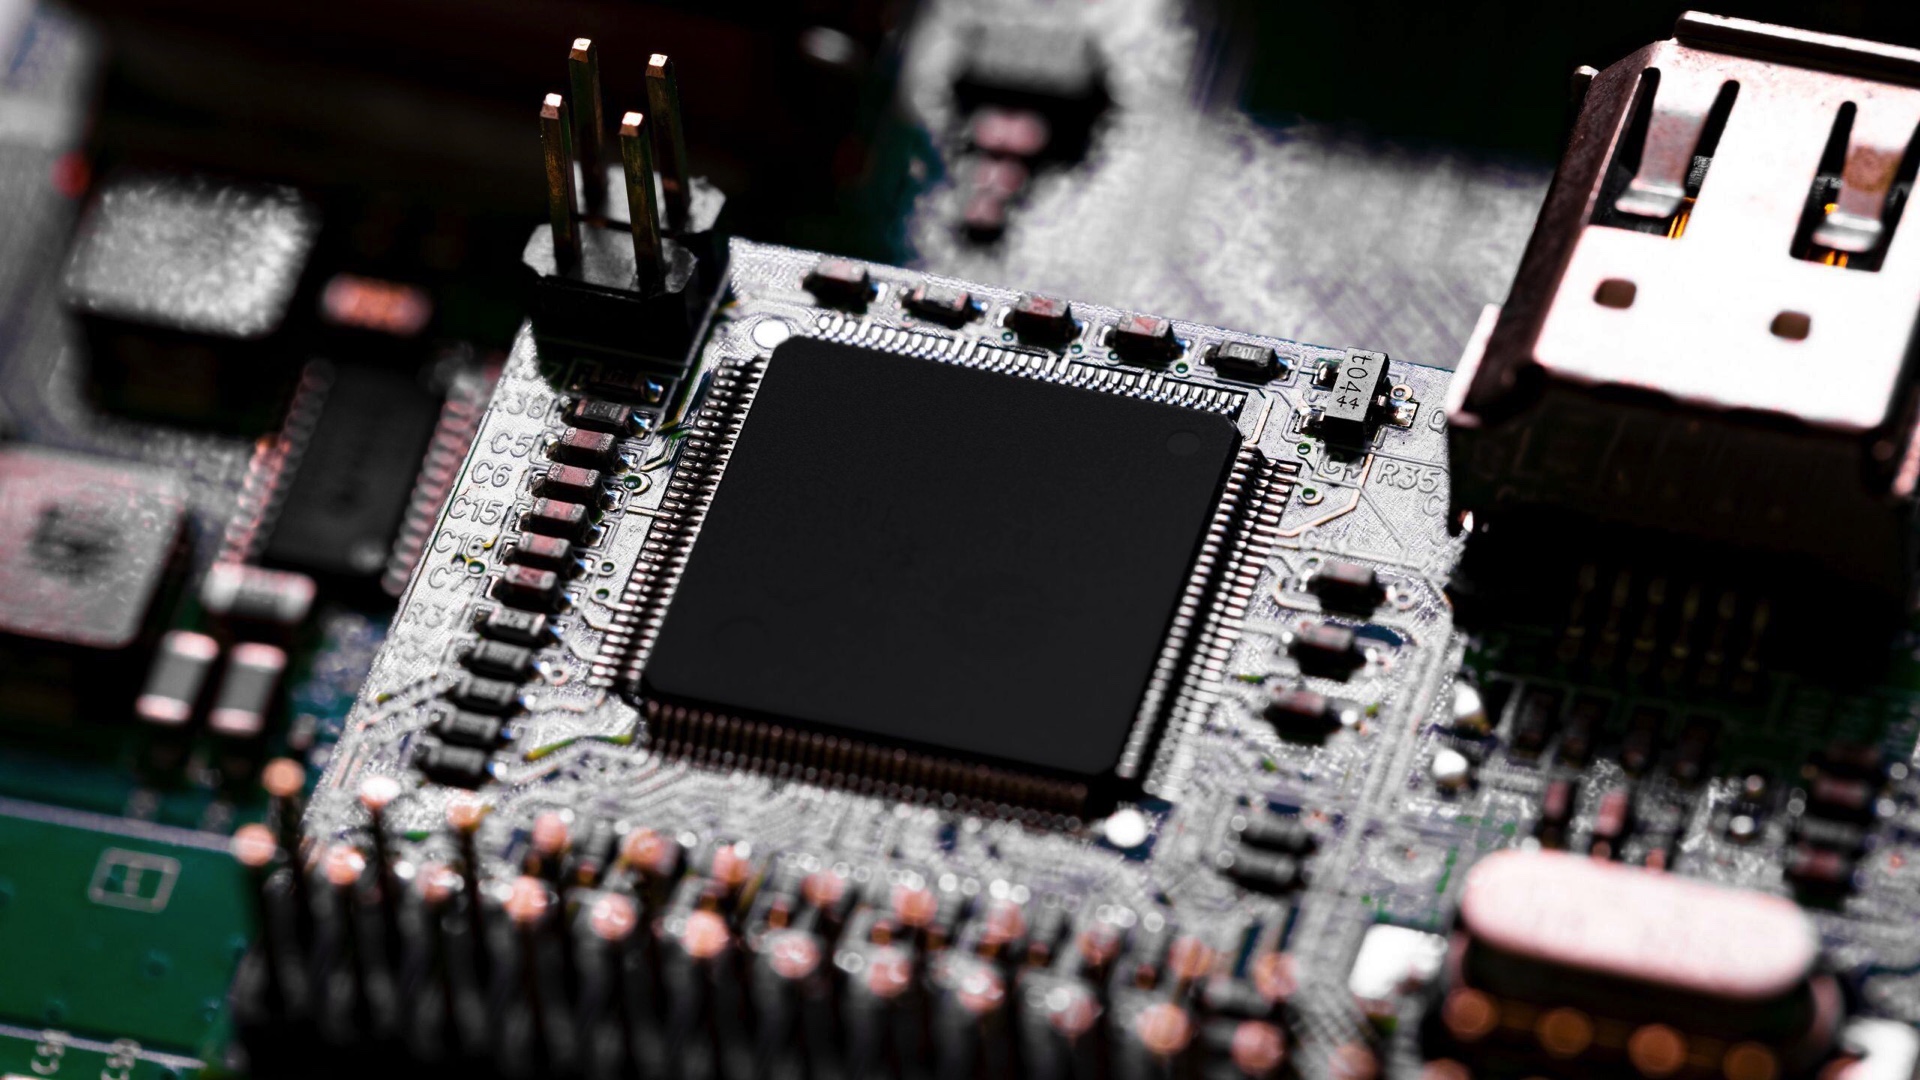 close-up-shot-of-components-and-microchips